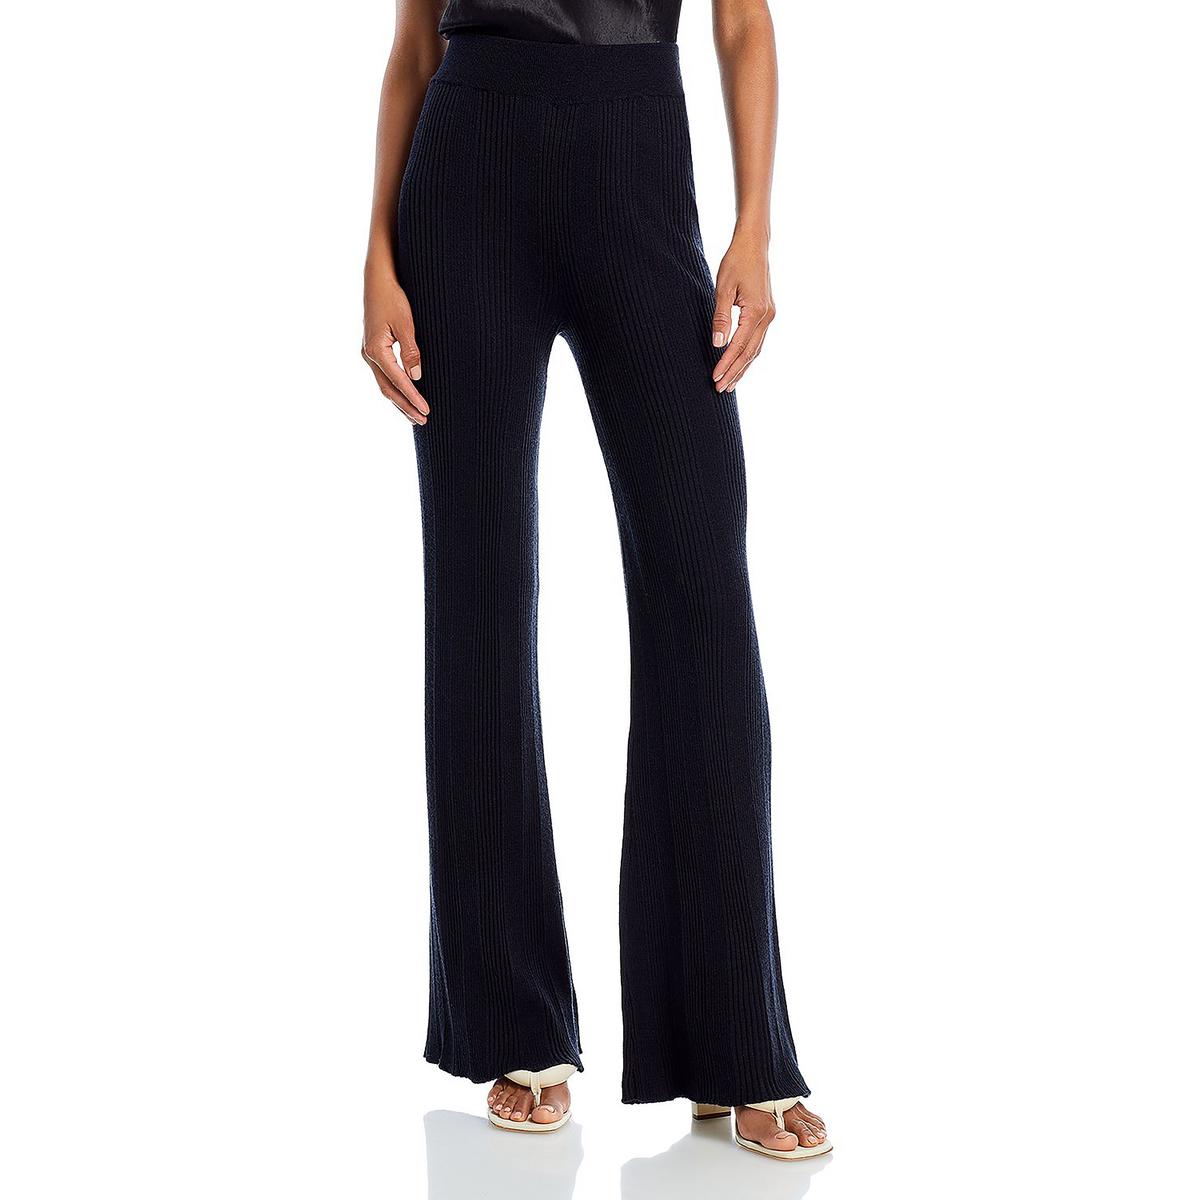 Buy Women's Long Wool High Waisted Trousers Online